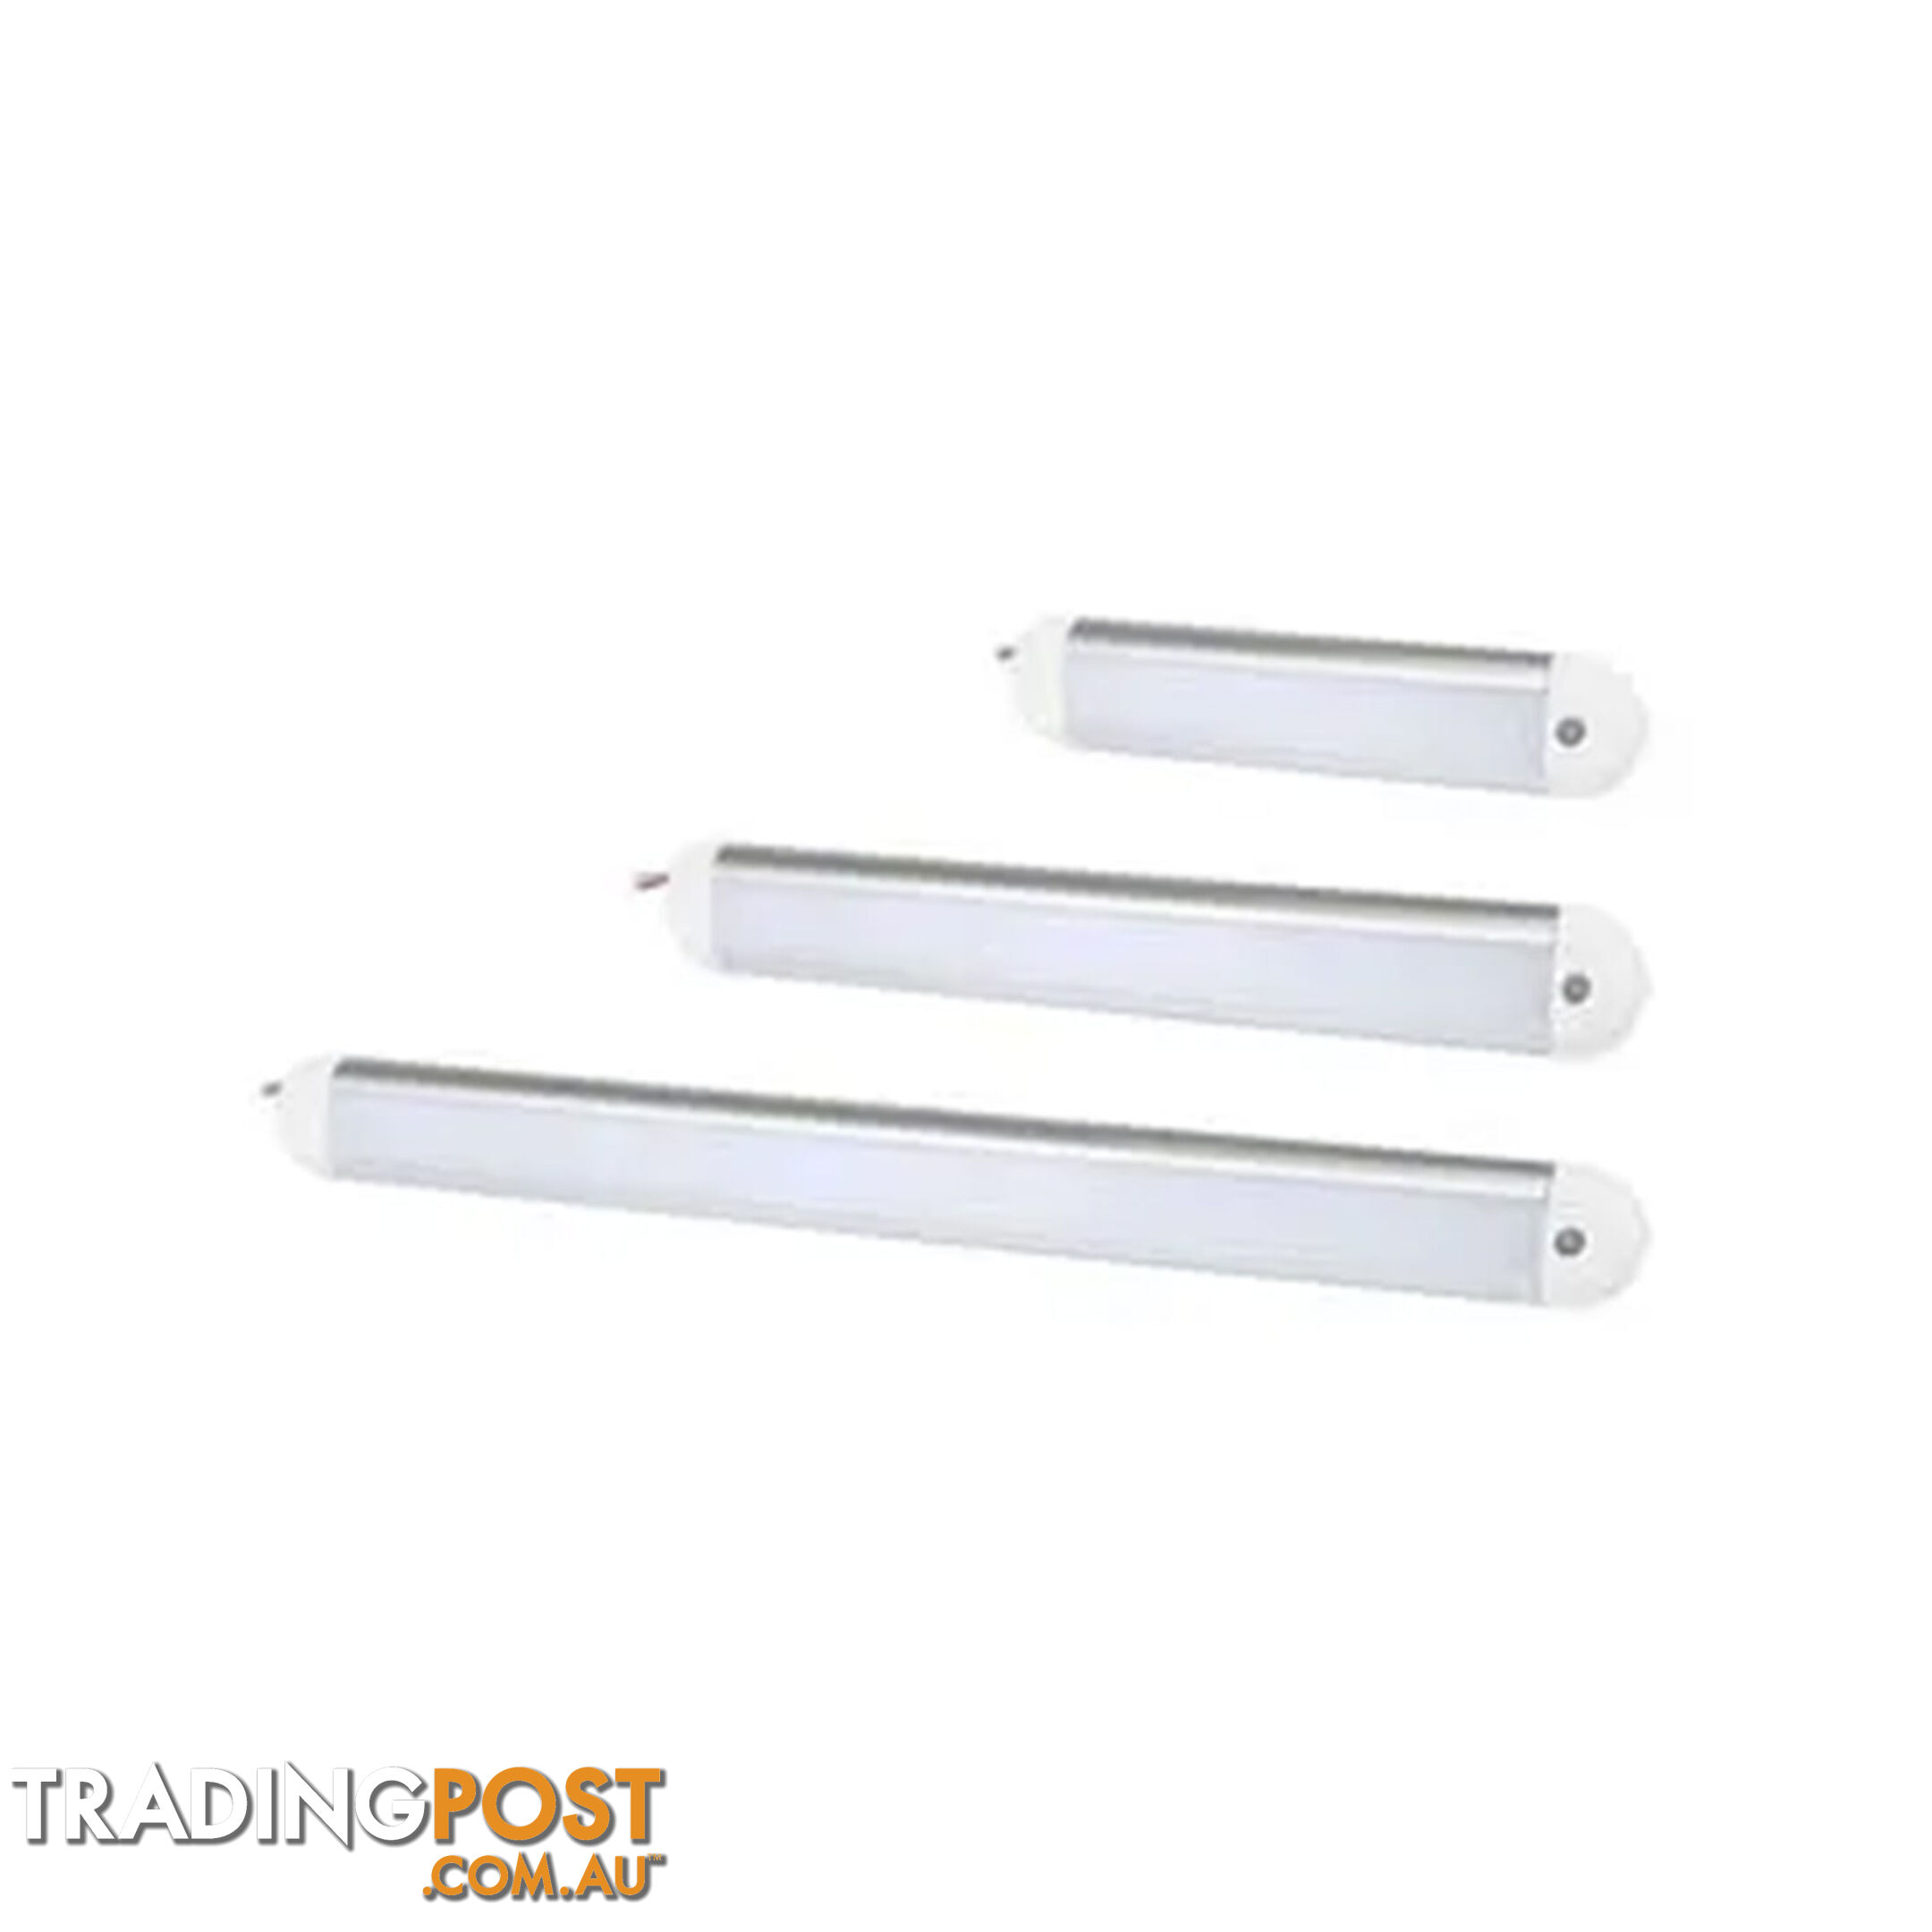 Whitevision LED Interior Light w/ Touch / Non-Switch option 10-30V SKU - IL054A, IL054B, IL054C, IL054HA, IL054HB, IL054HC